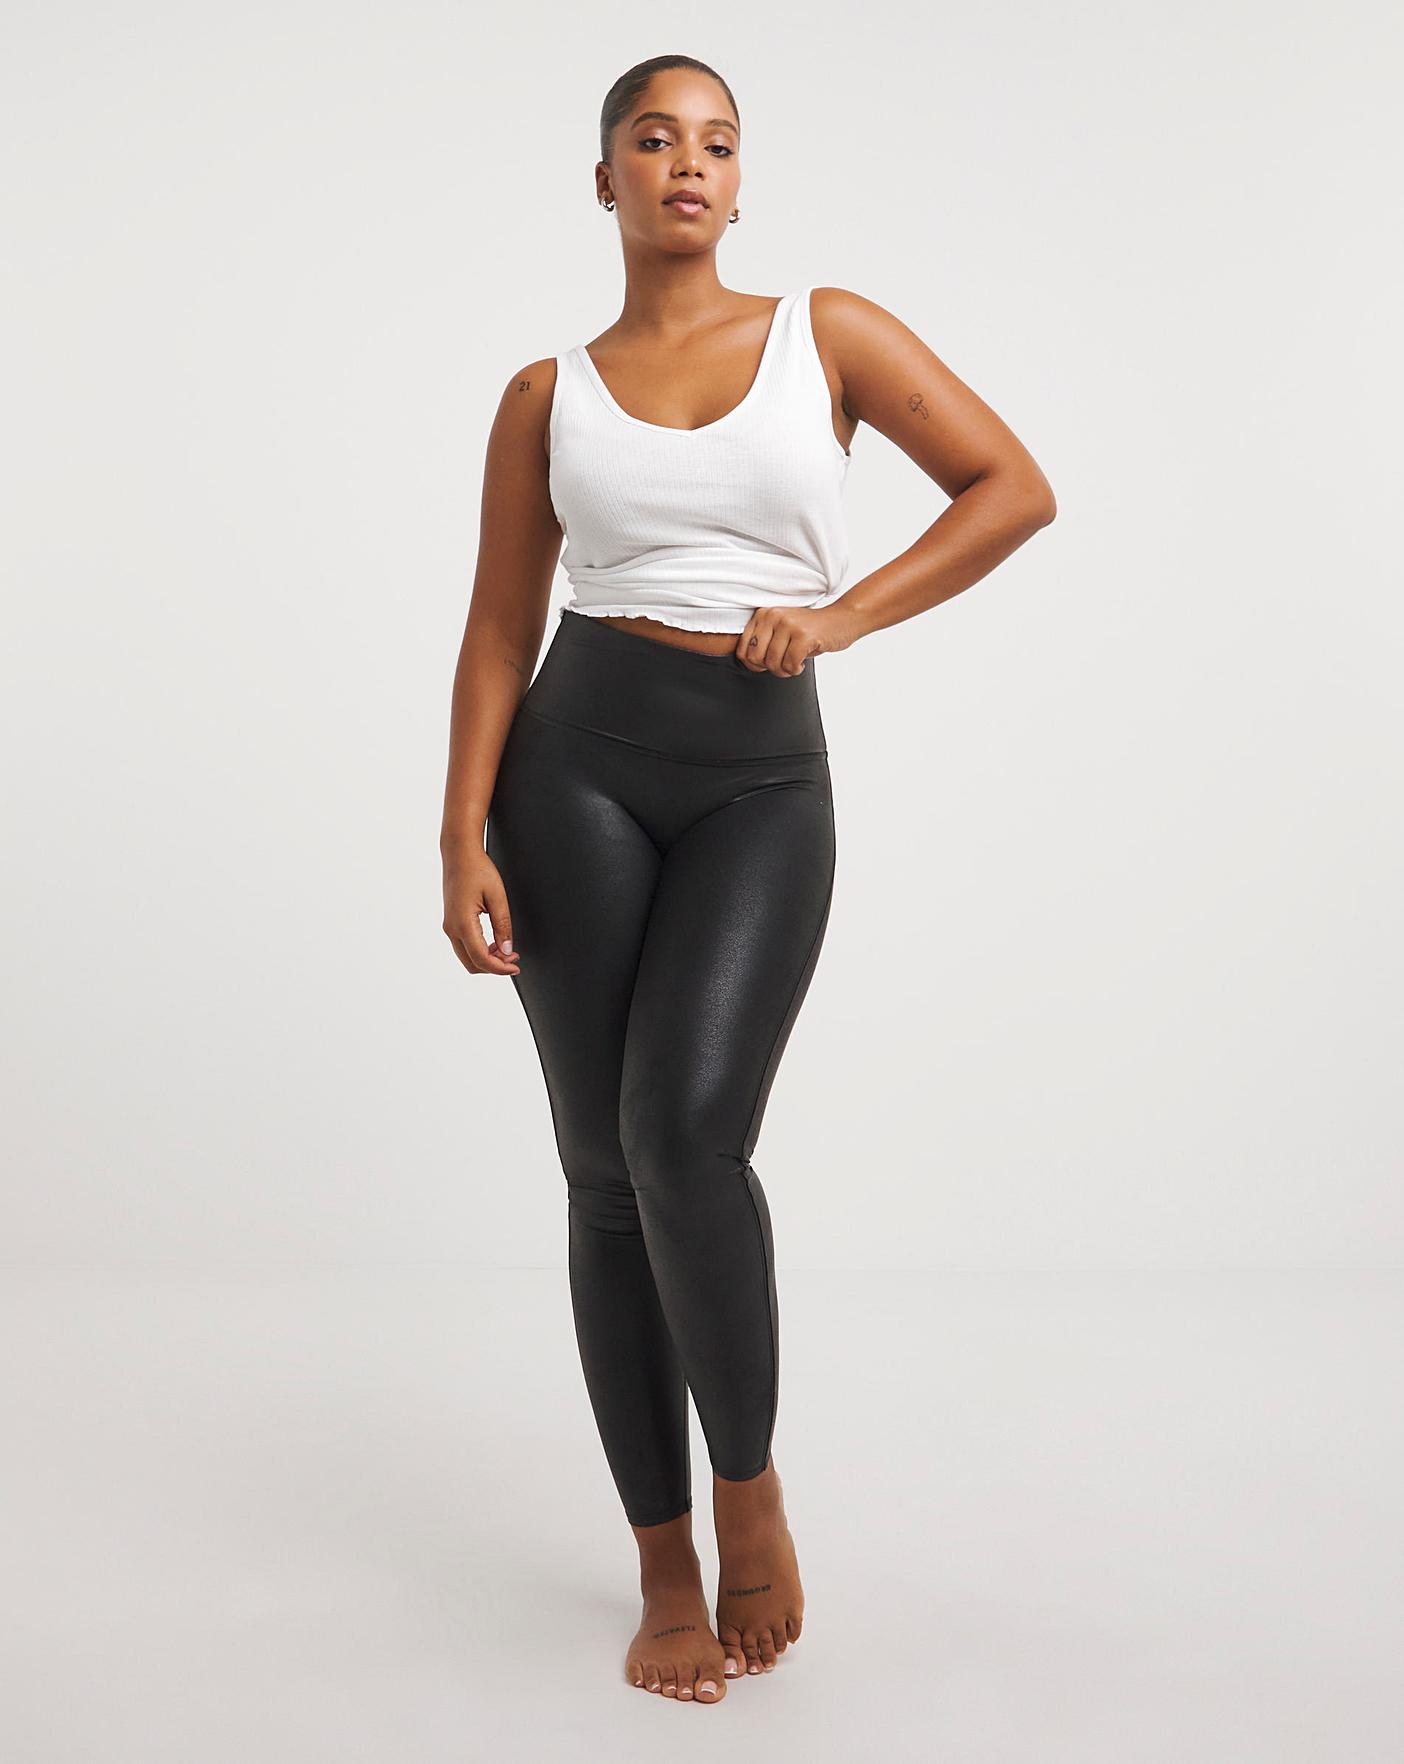 Iron Scale Leggings | Buy Workout Leggings – Constantly Varied Gear